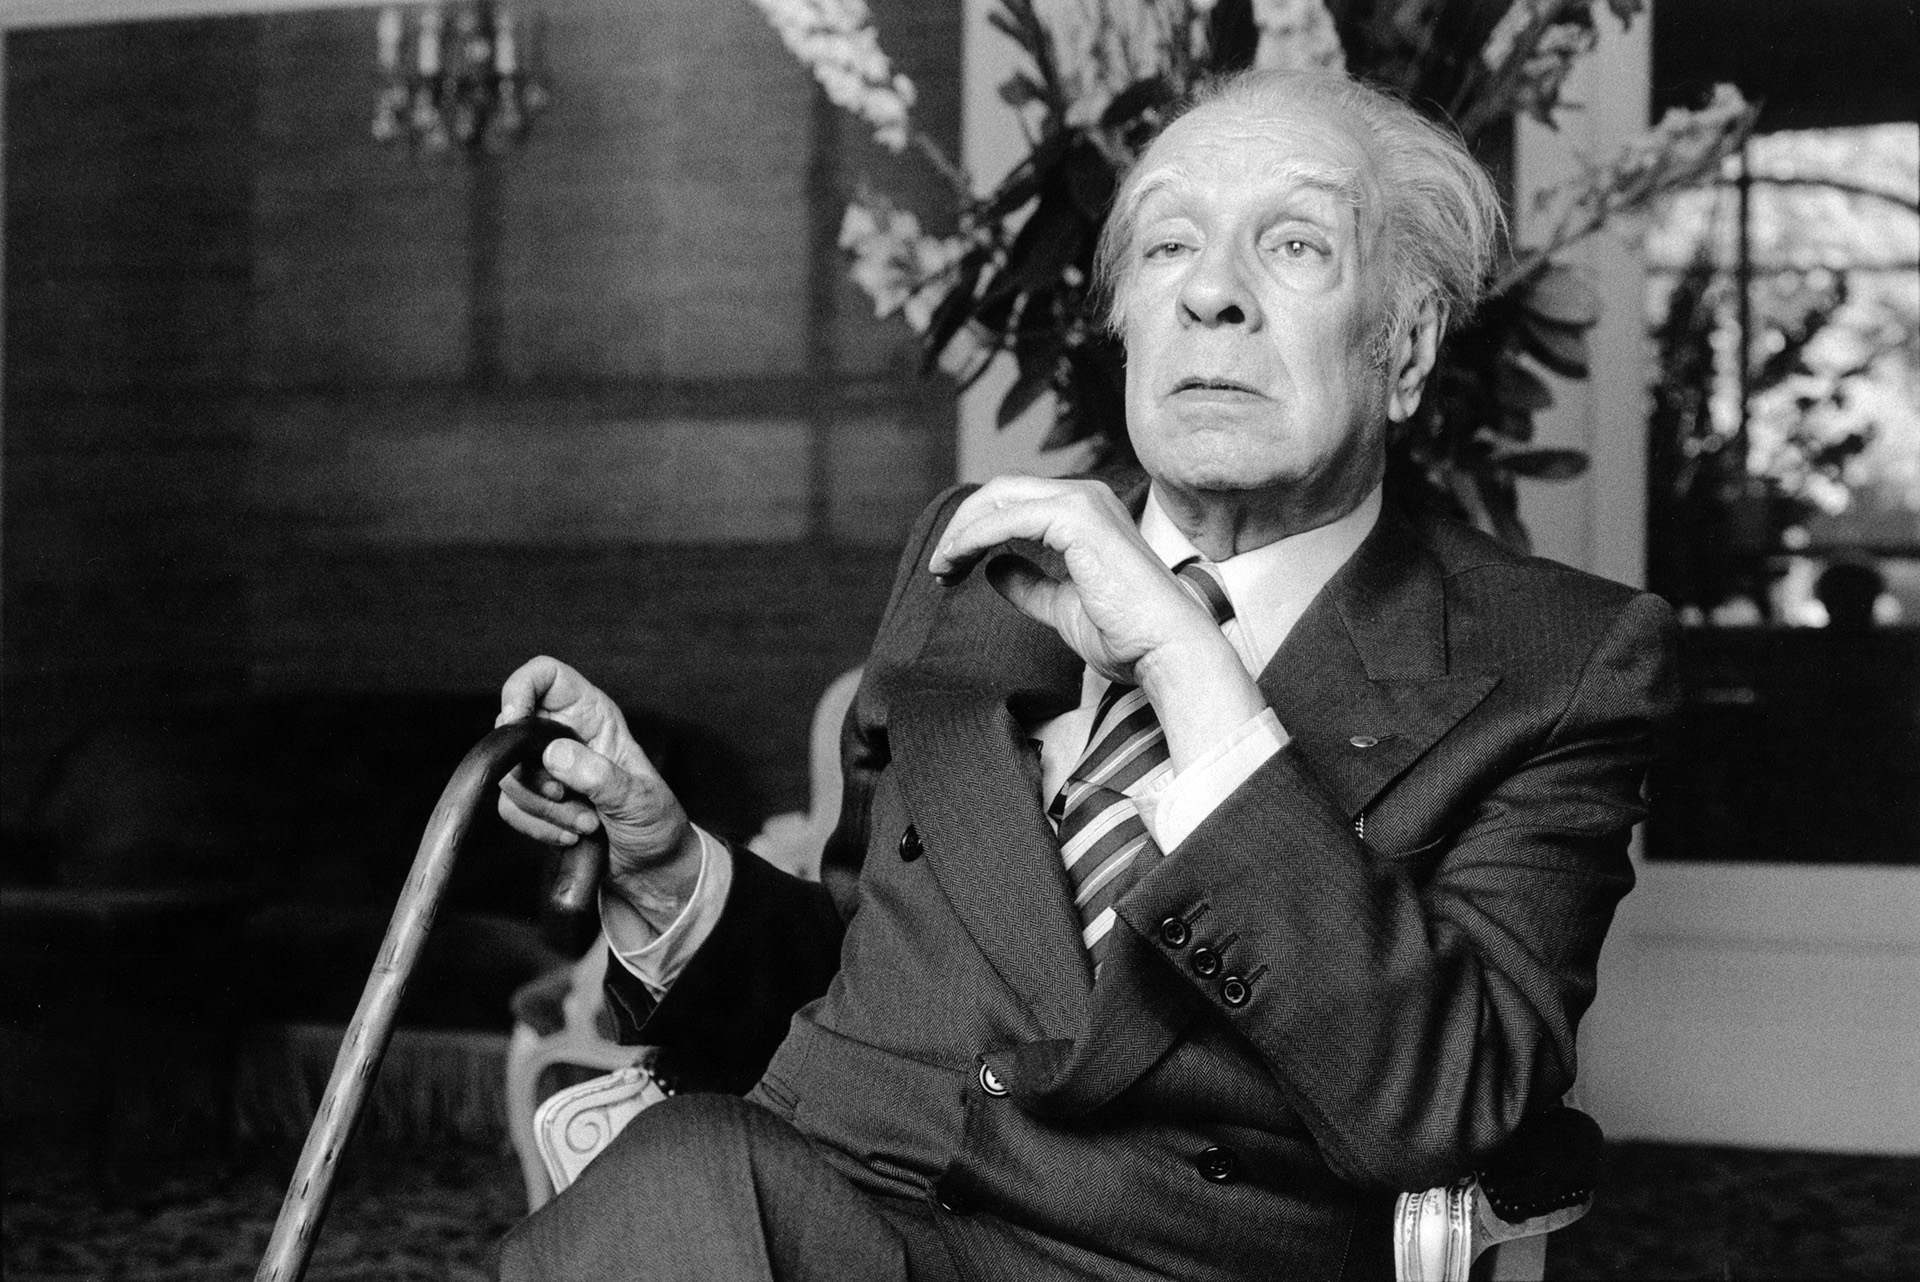 Jorge Luis Borges (Photo: Ulf Andersen/Getty Images)